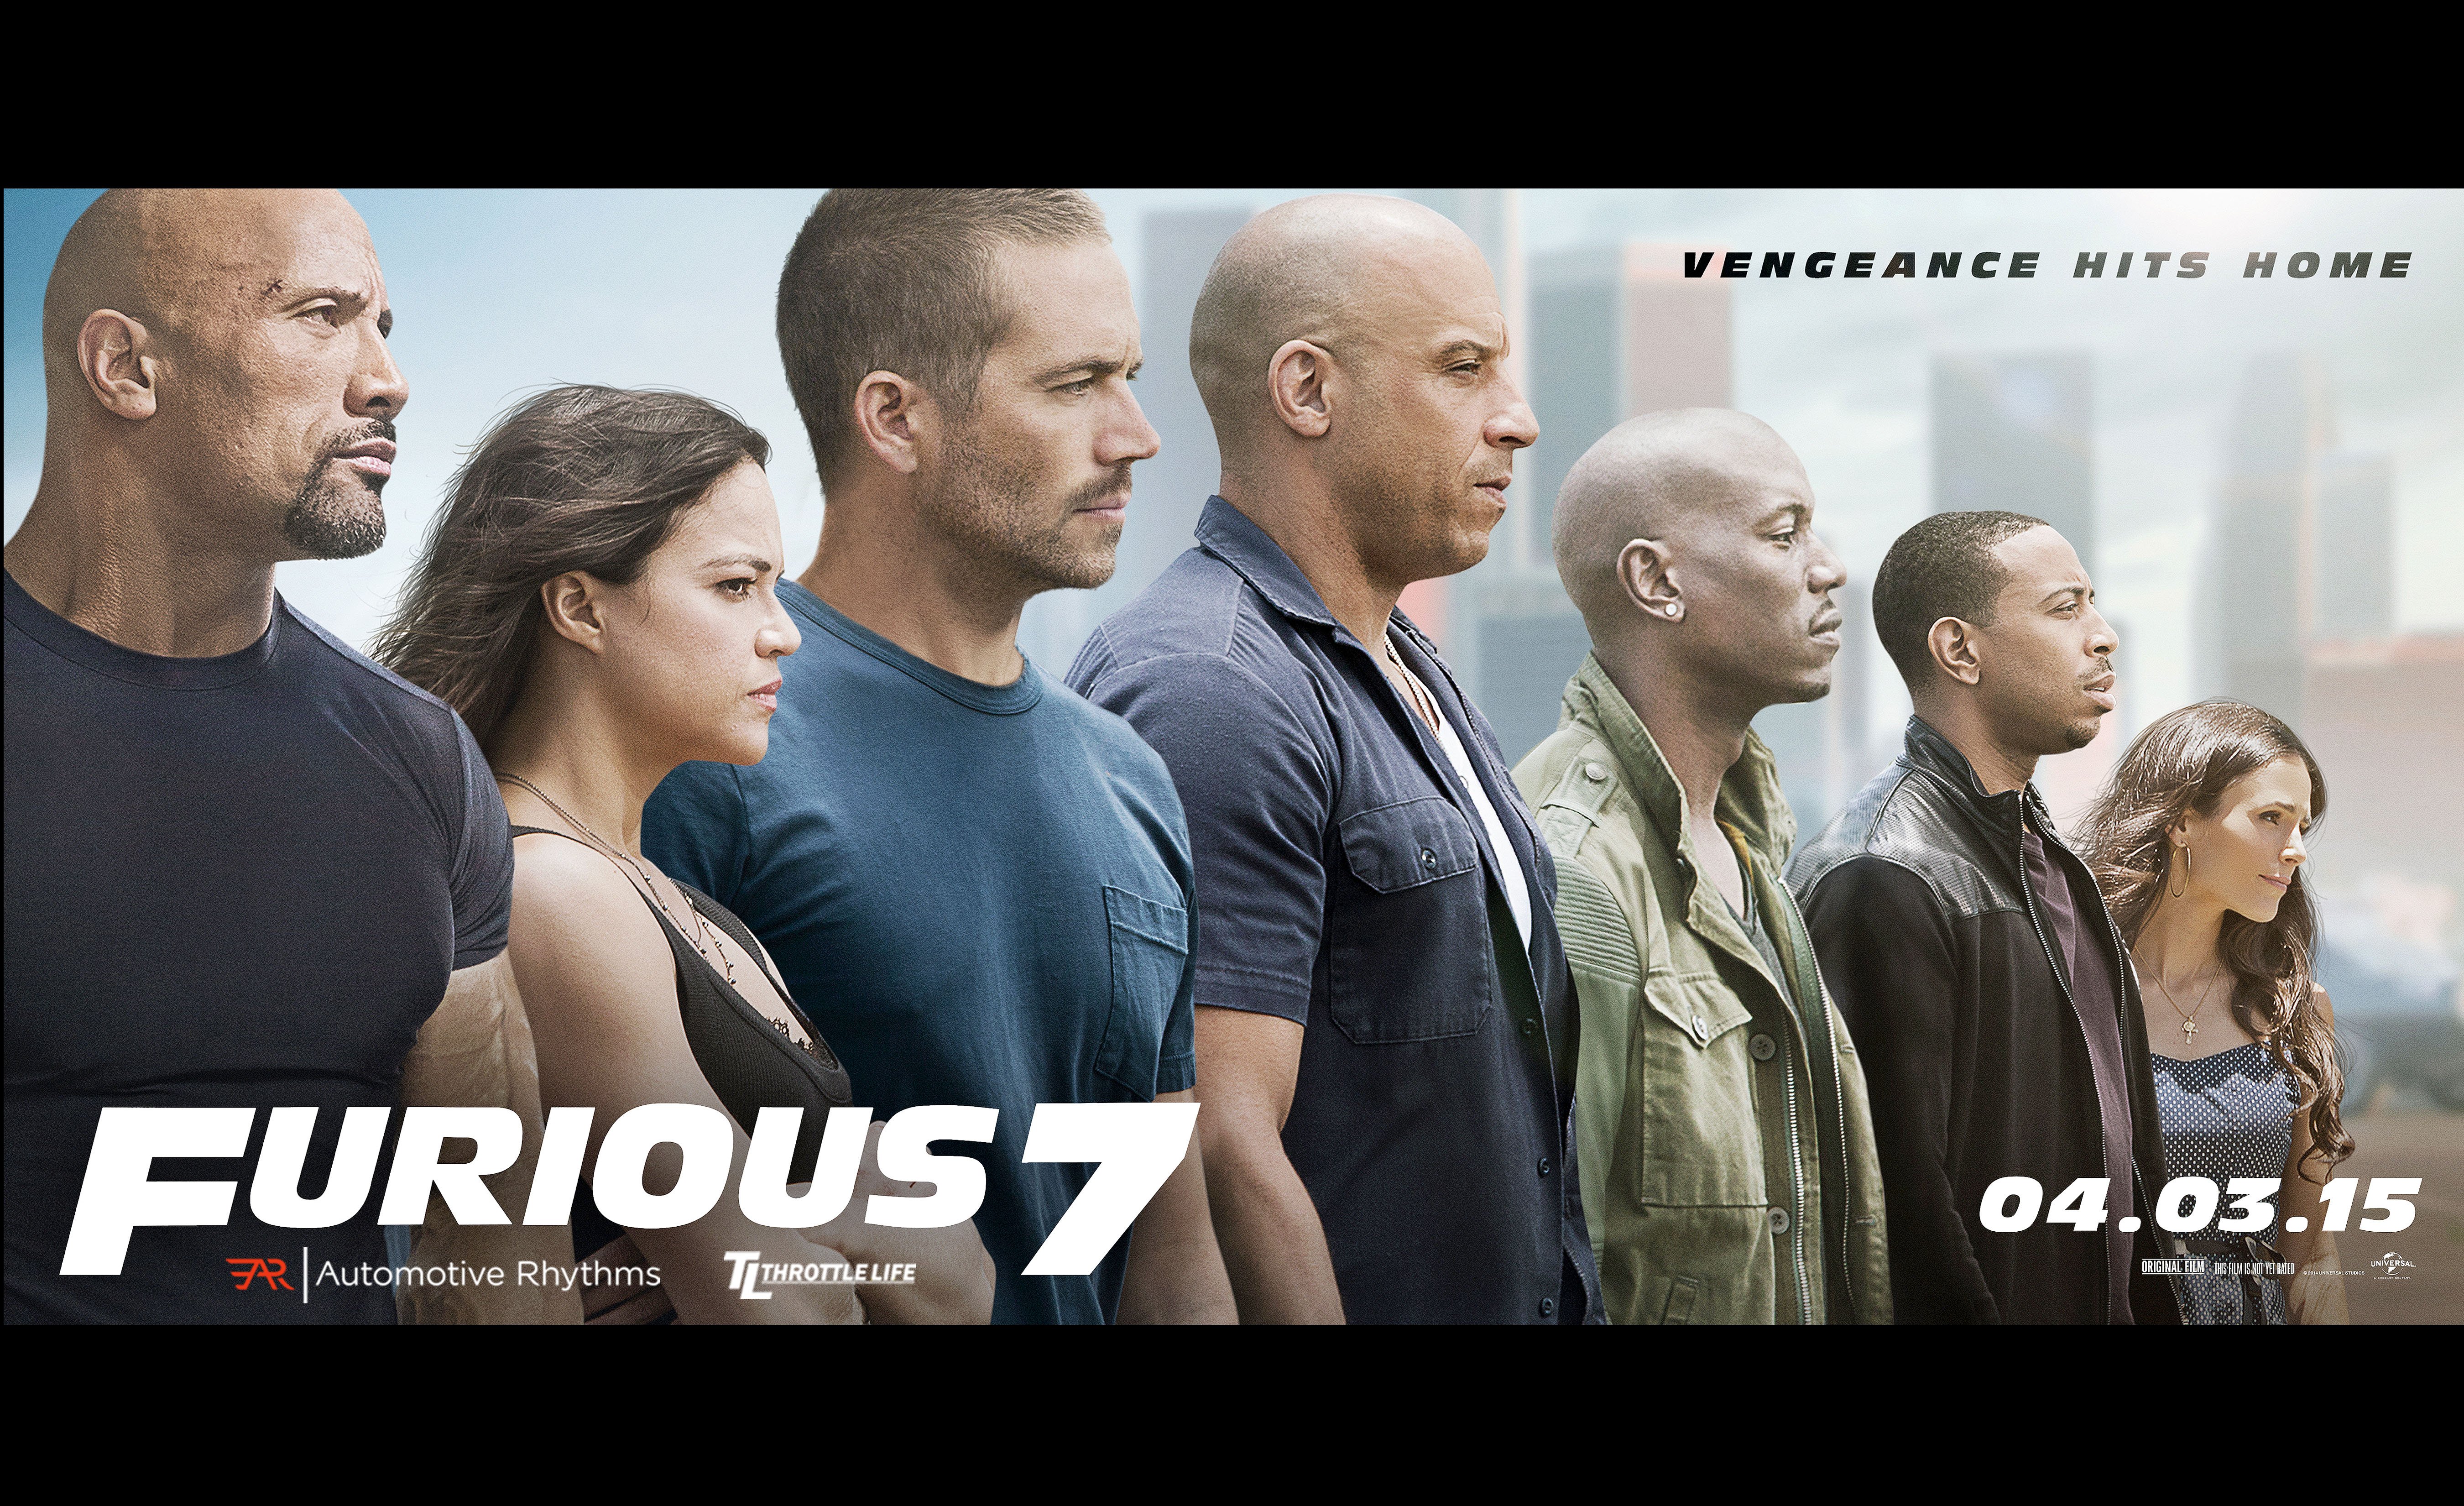 FAST FURIOUS 7 action thriller race racing crime ff7 1ff7 poster ...